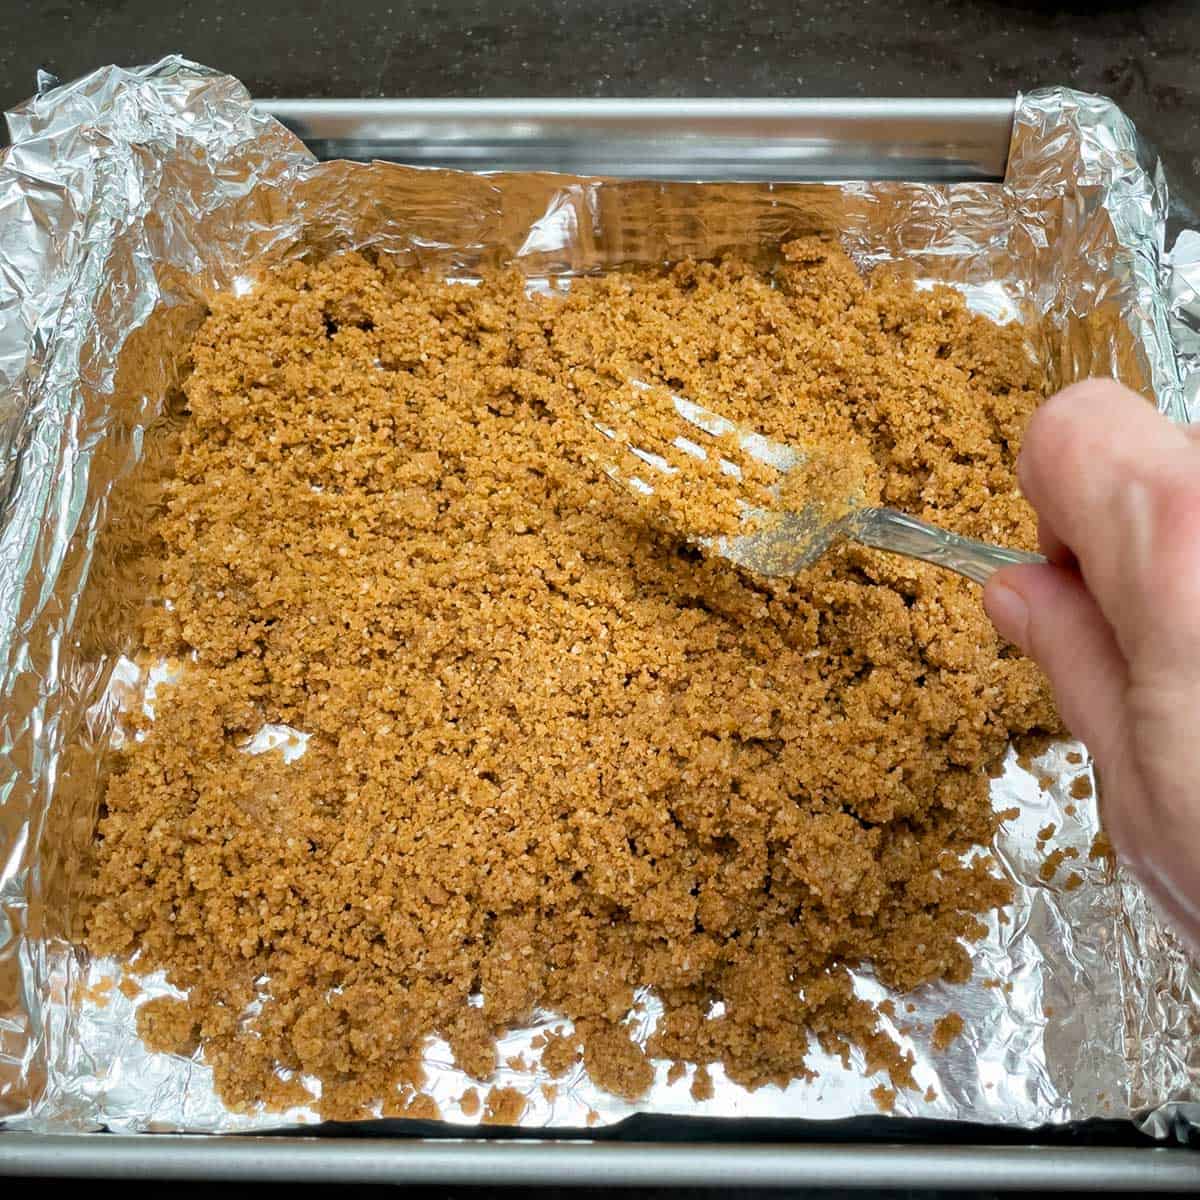 Pour the graham cracker crumble on to the tinfoil lined paned and spread it around the bottom.